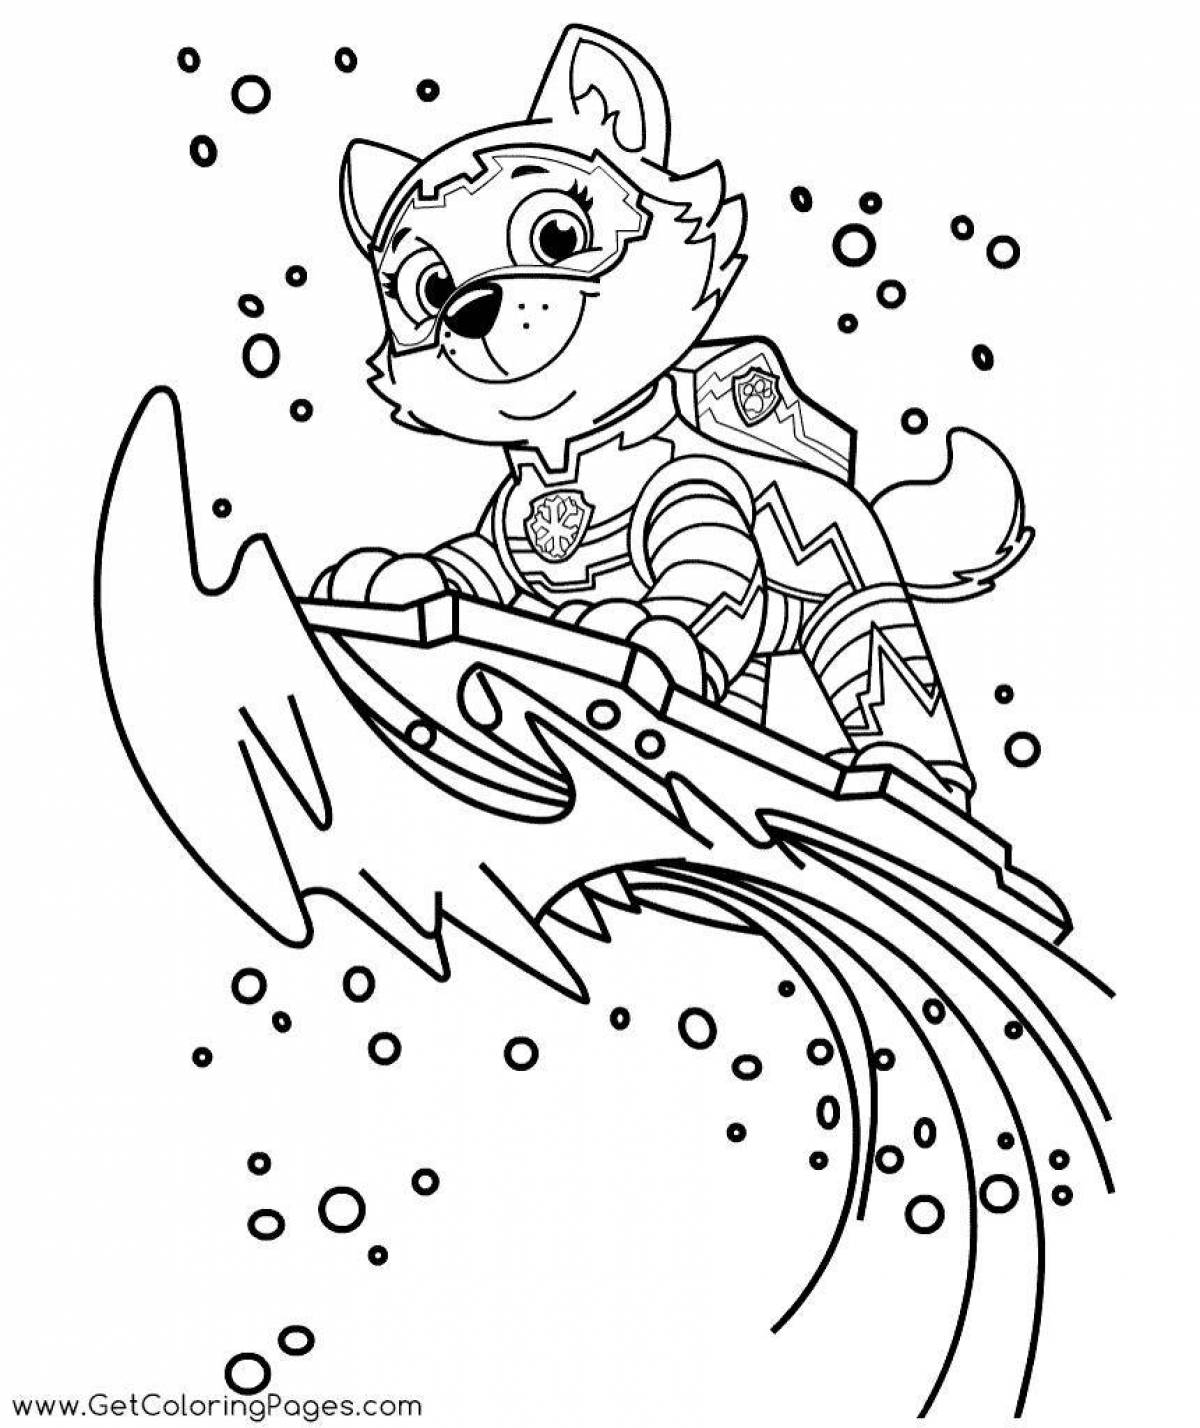 Fabulous water paw patrol coloring page